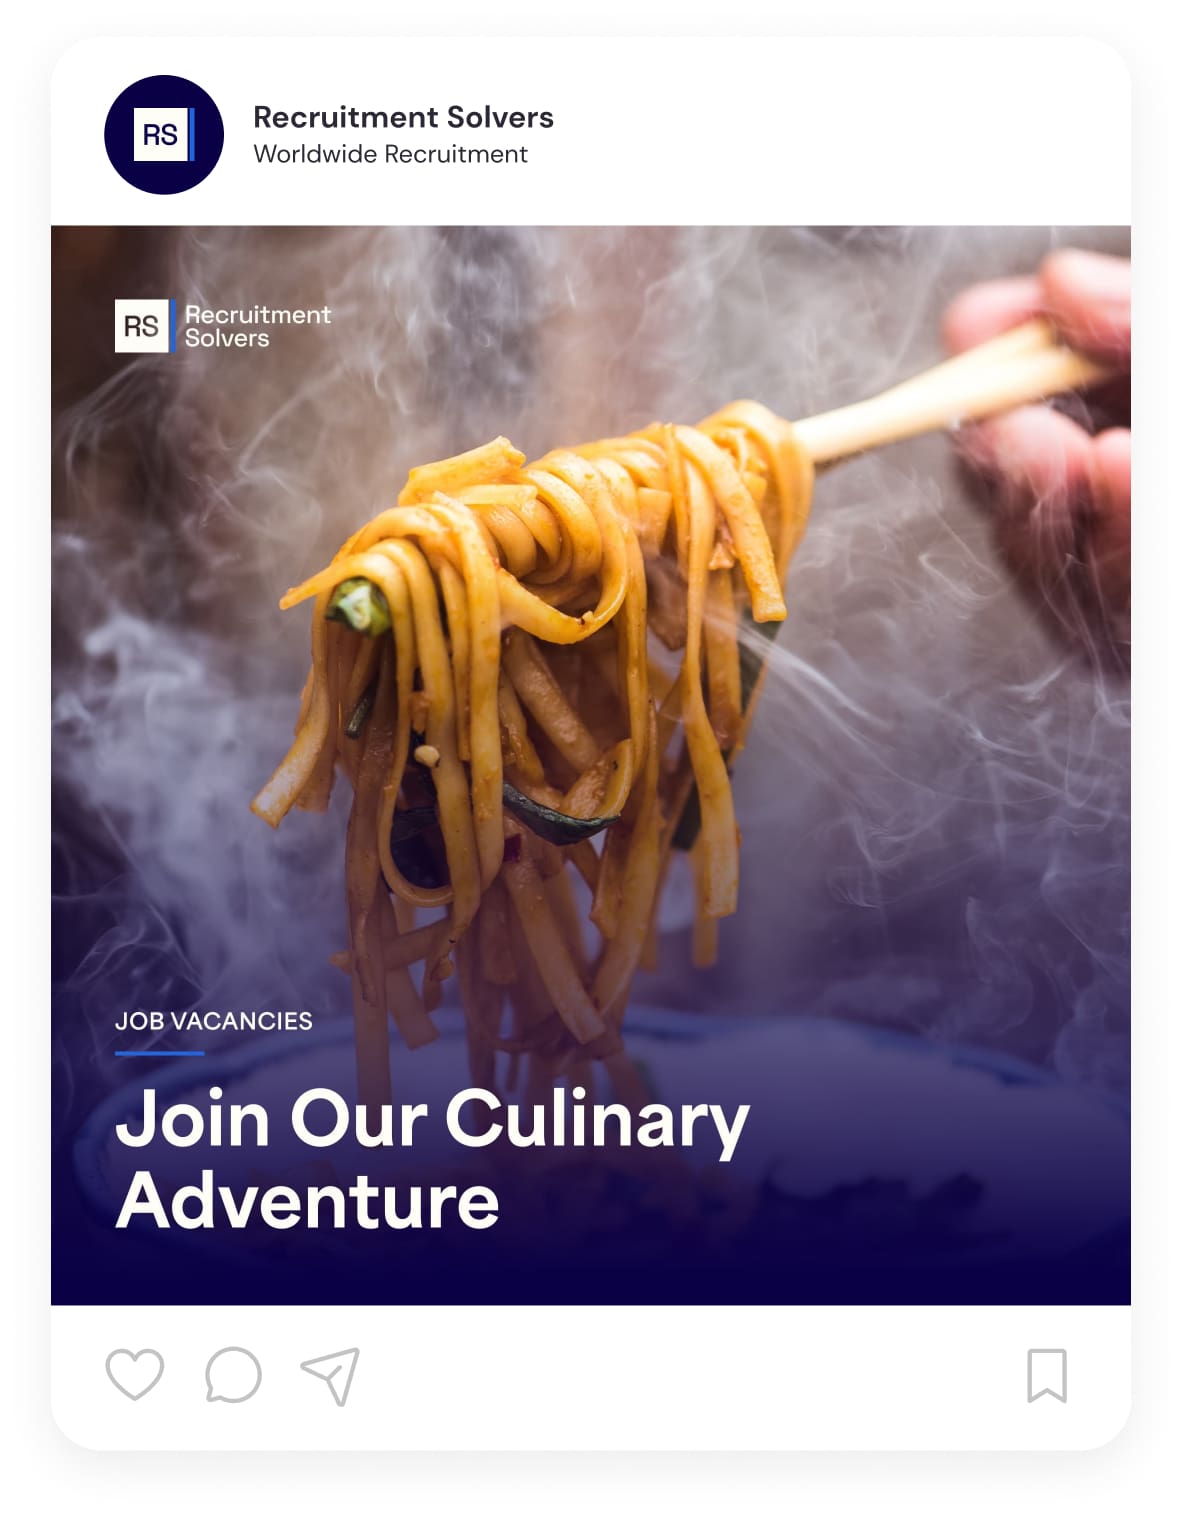 An instagram mockup up image containing bowl of hot, steamy noodles draped on a pair of chopsticks against a dark blue gradient